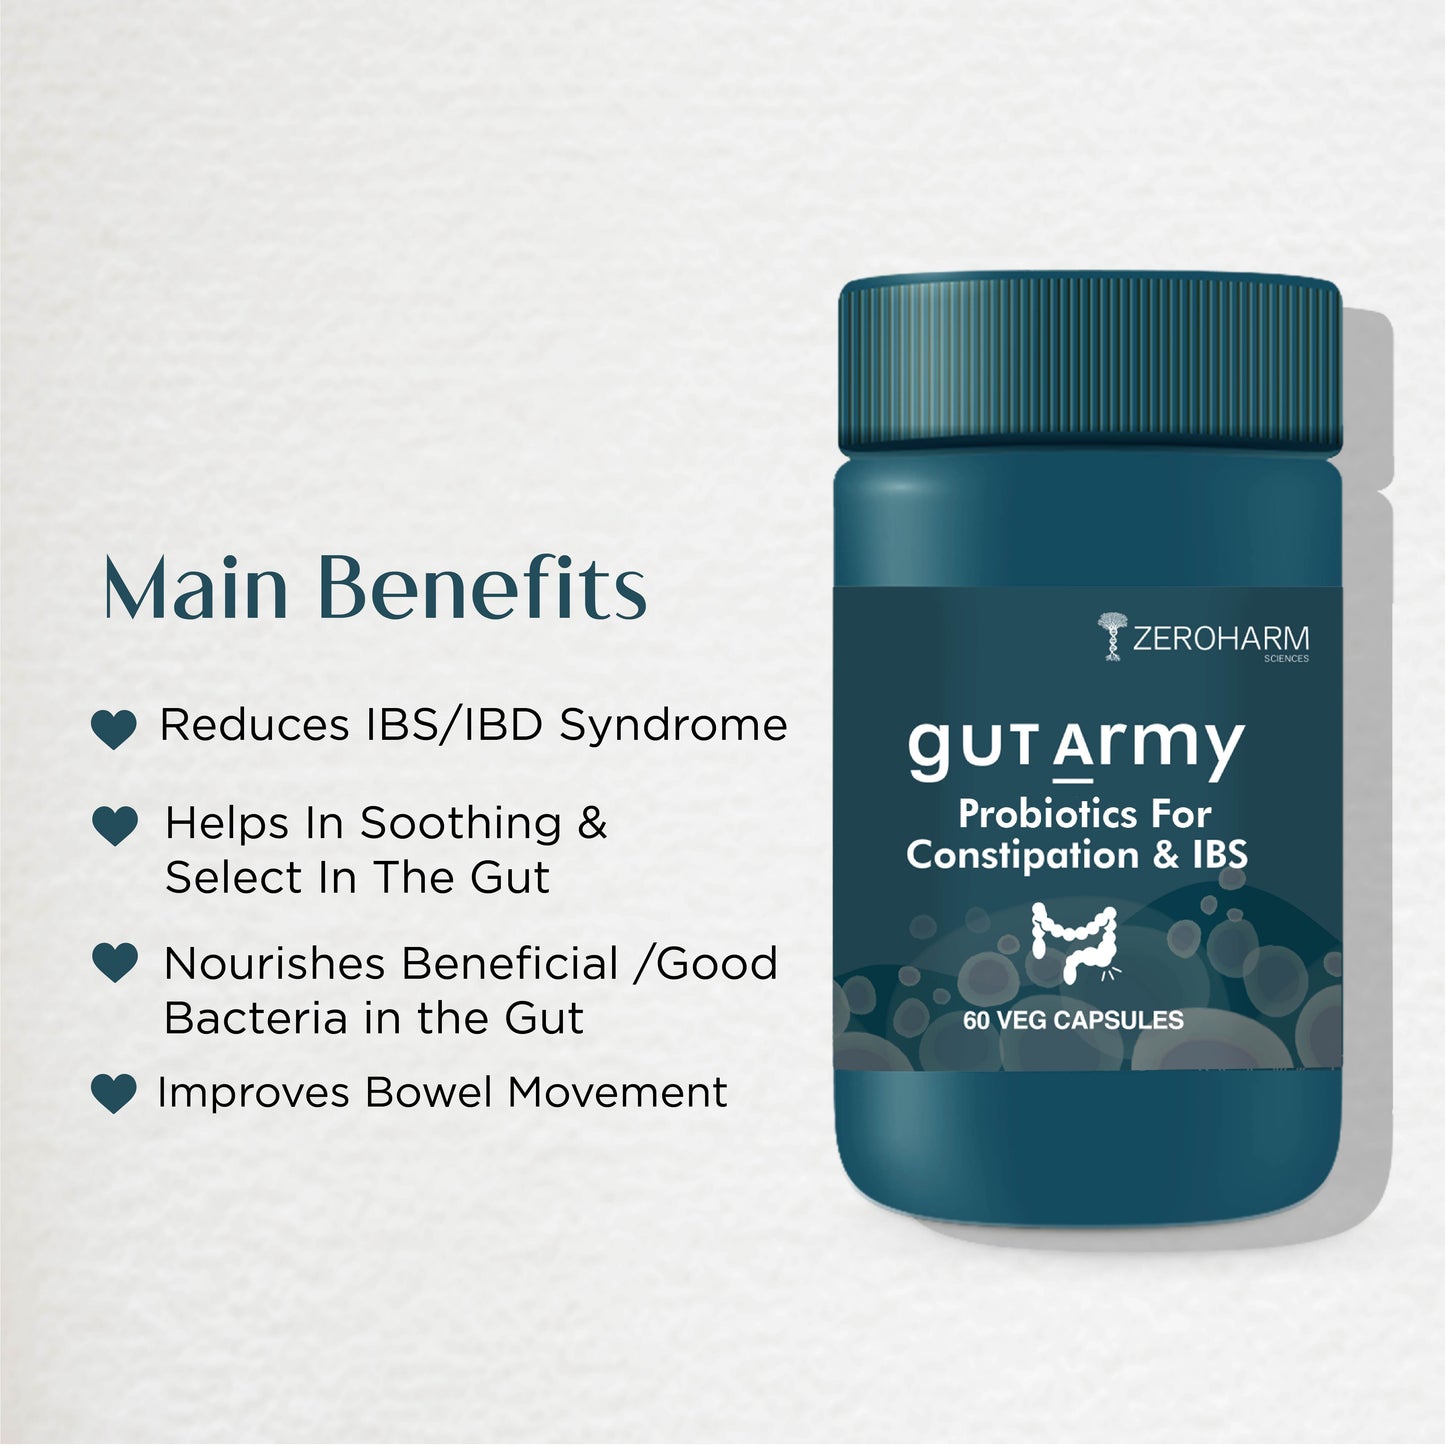 Gut Army Constipation IBS Capsules